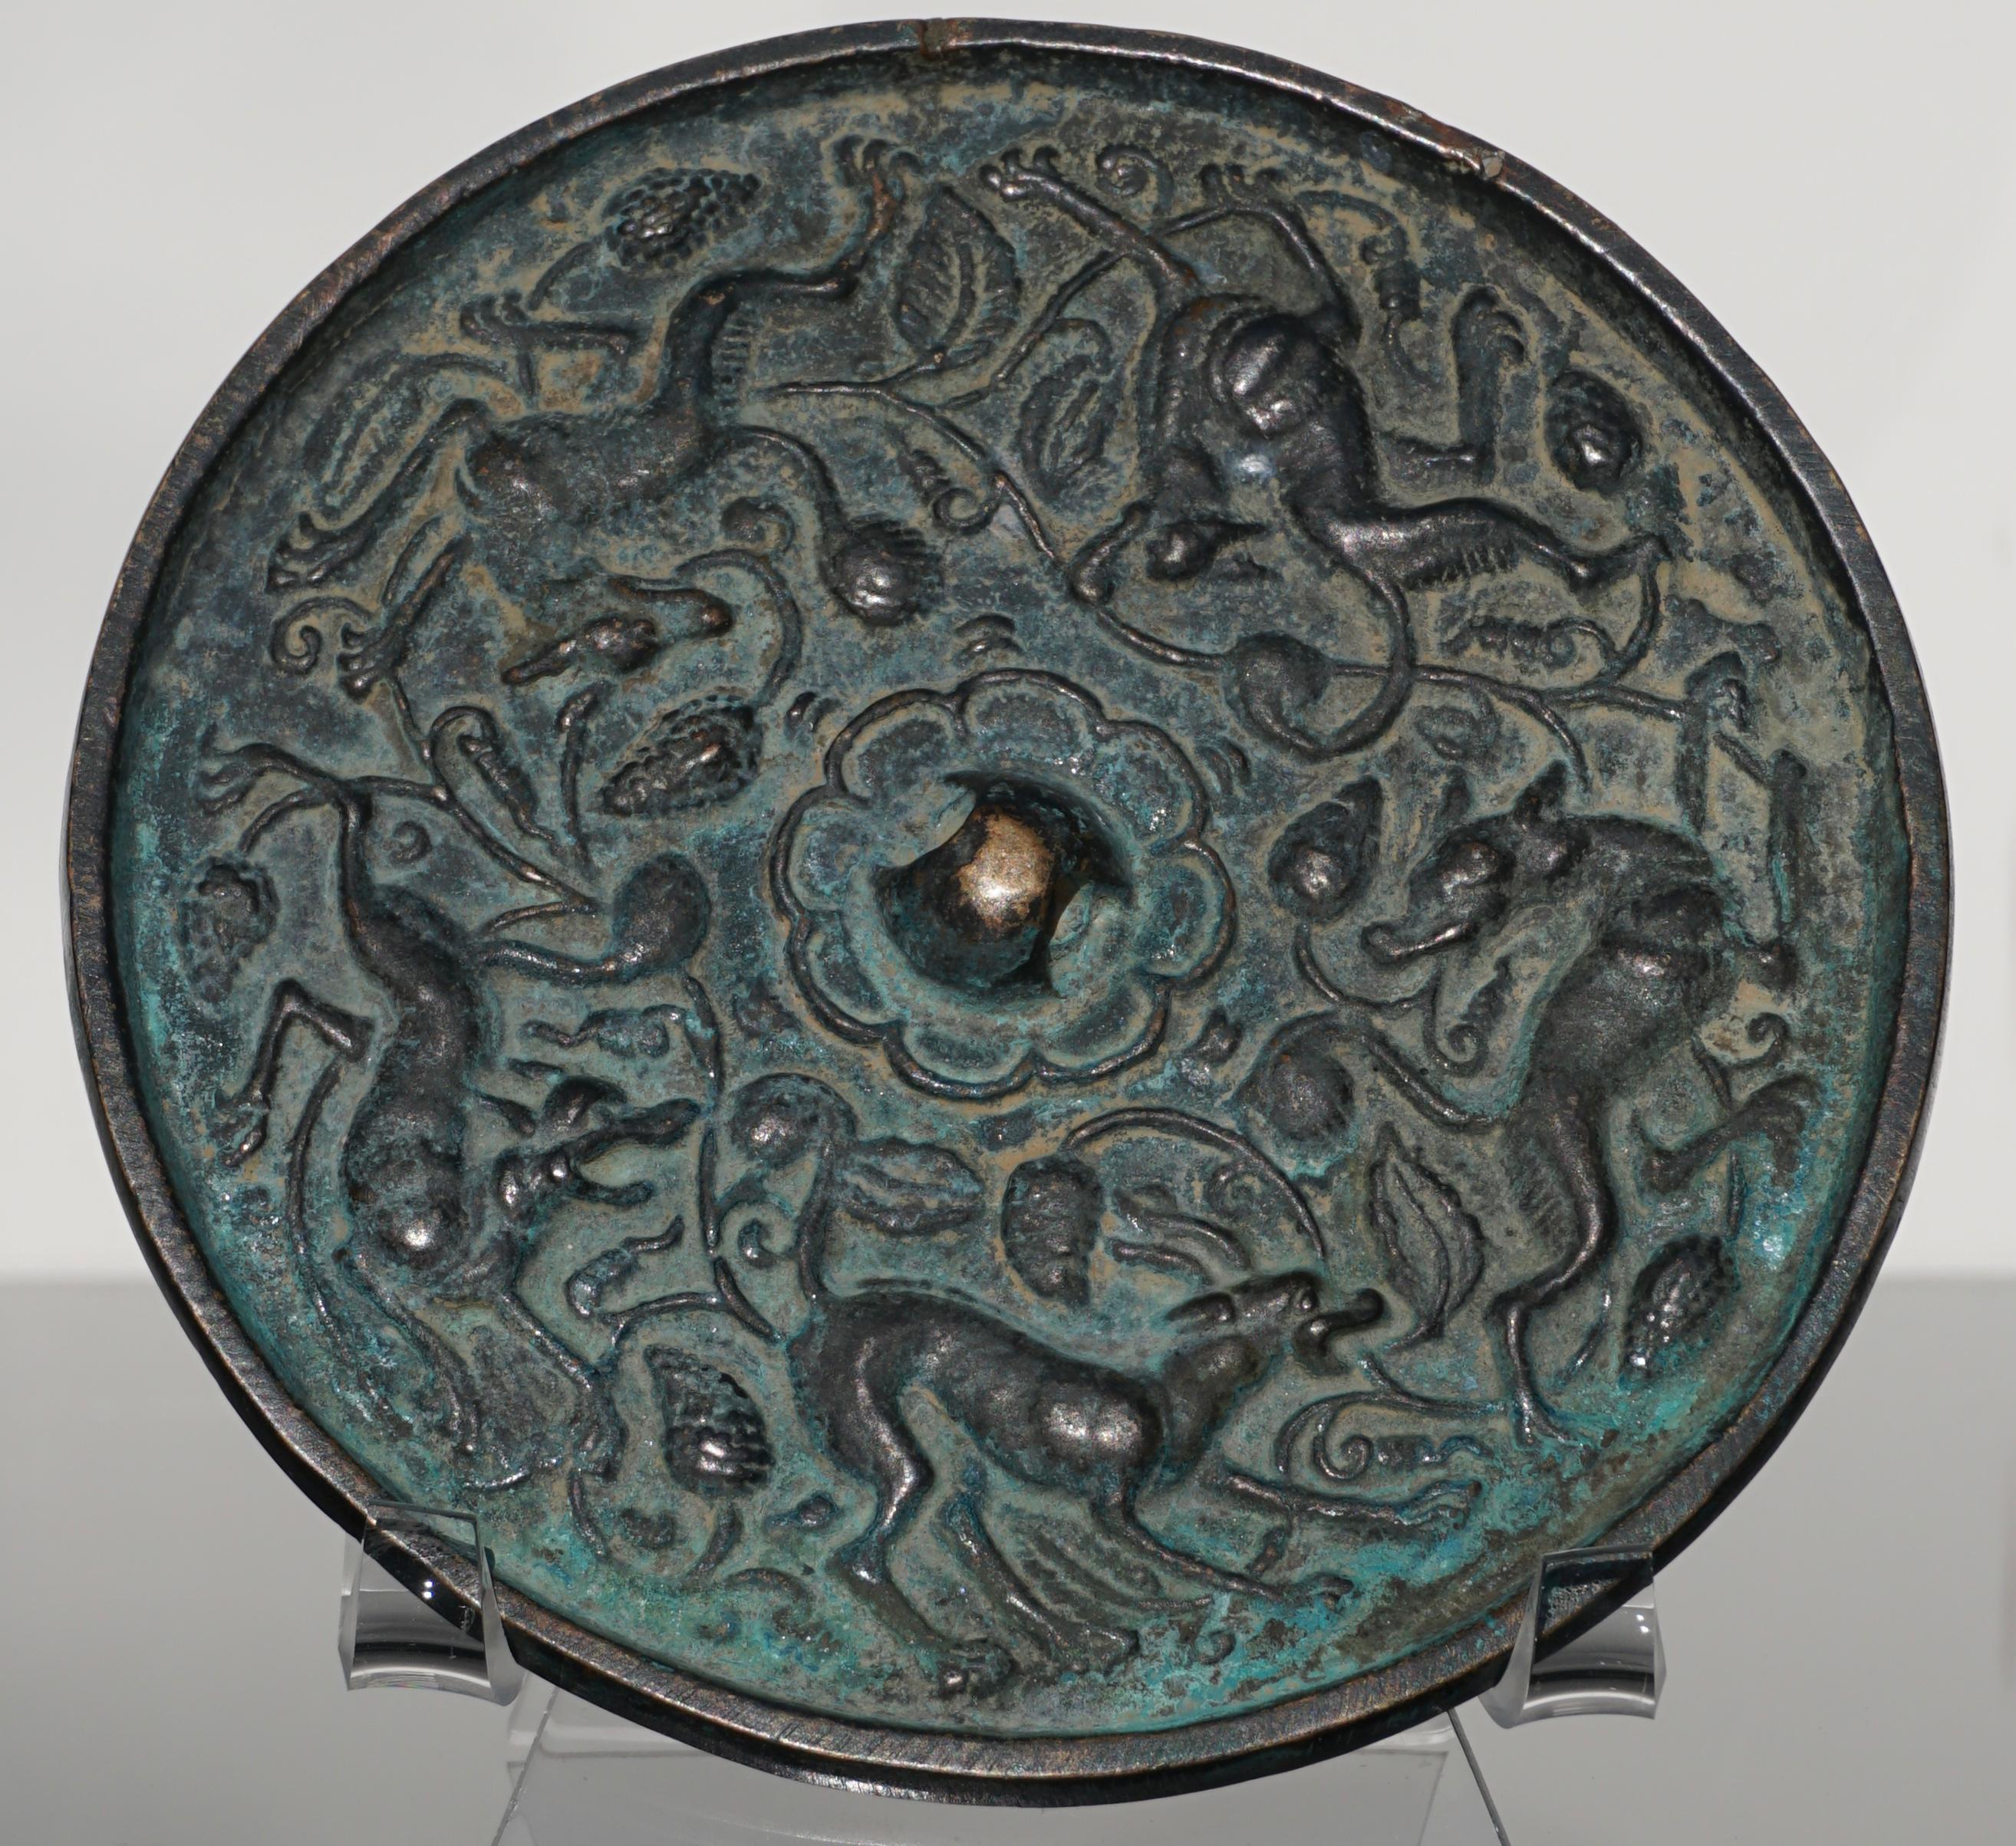 Tang dynasty, Chinese bronze mirror of 5 running suani beasts and grapevines. The pierced nub has a floral lotus in the centre. These mirrors were very prevalent in china among the elite status and had many uses from looking at ones self to